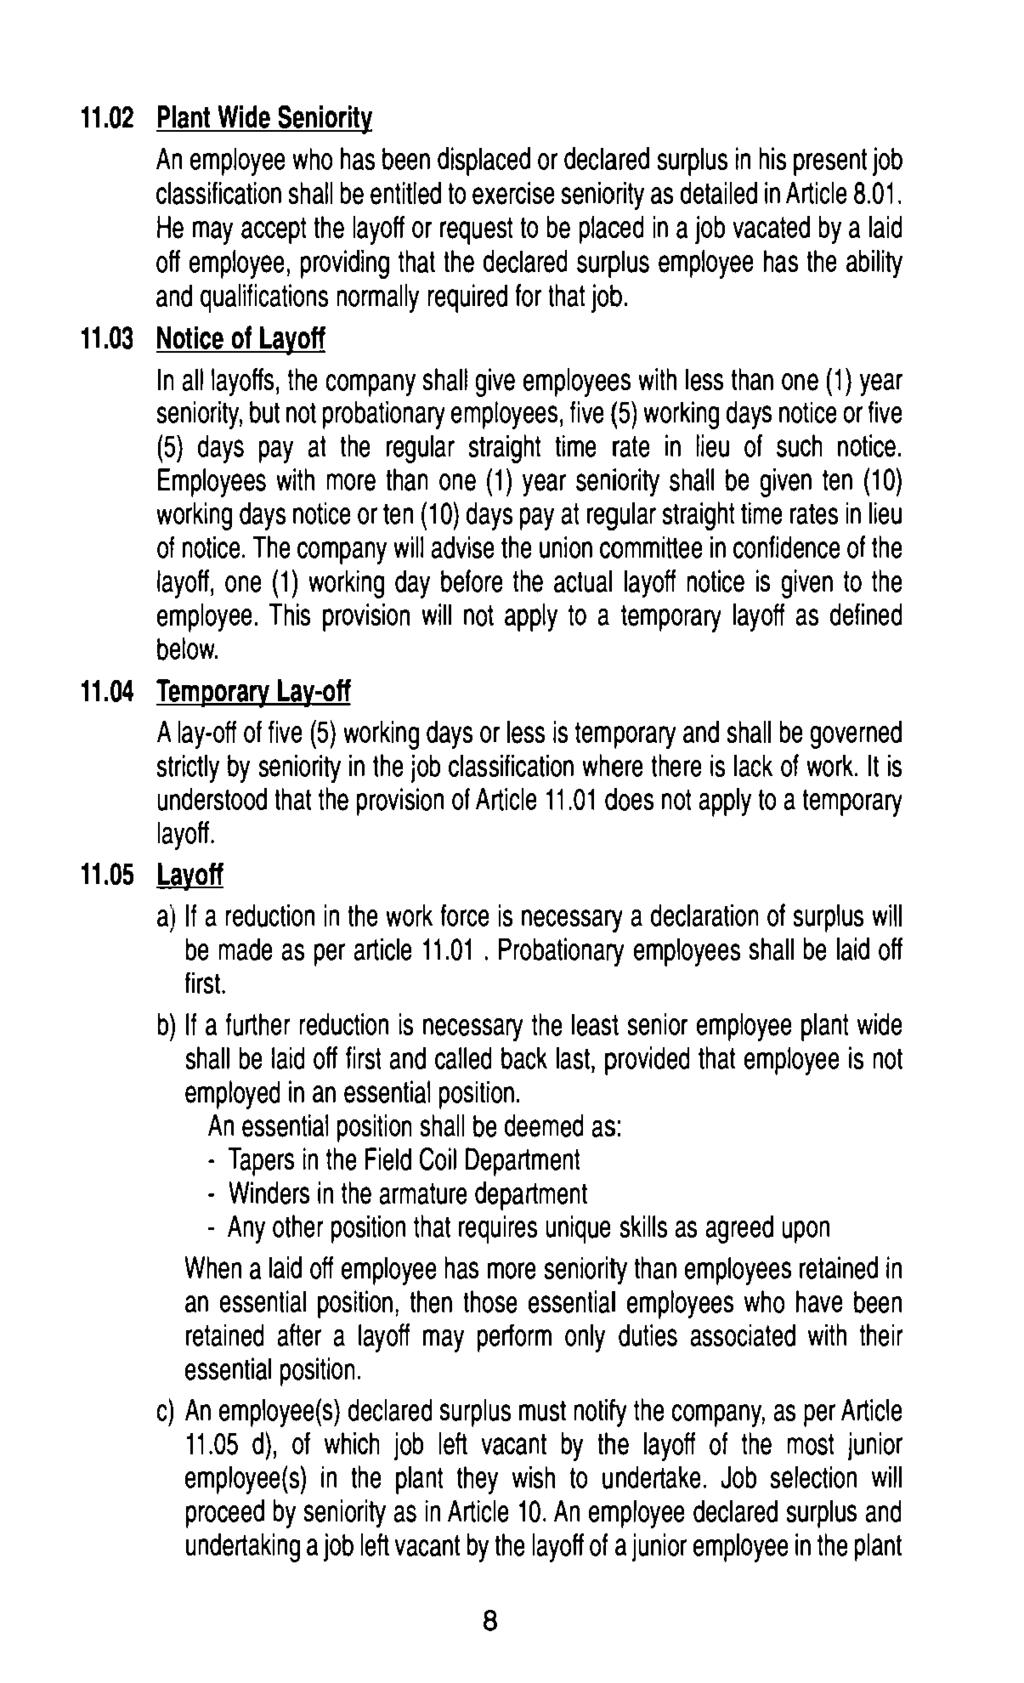 11.02 Plant Wide Seniority An employee who has been displaced or declared surplus in his present job classification shall be entitled to exercise seniority as detailed in Article 8.01.